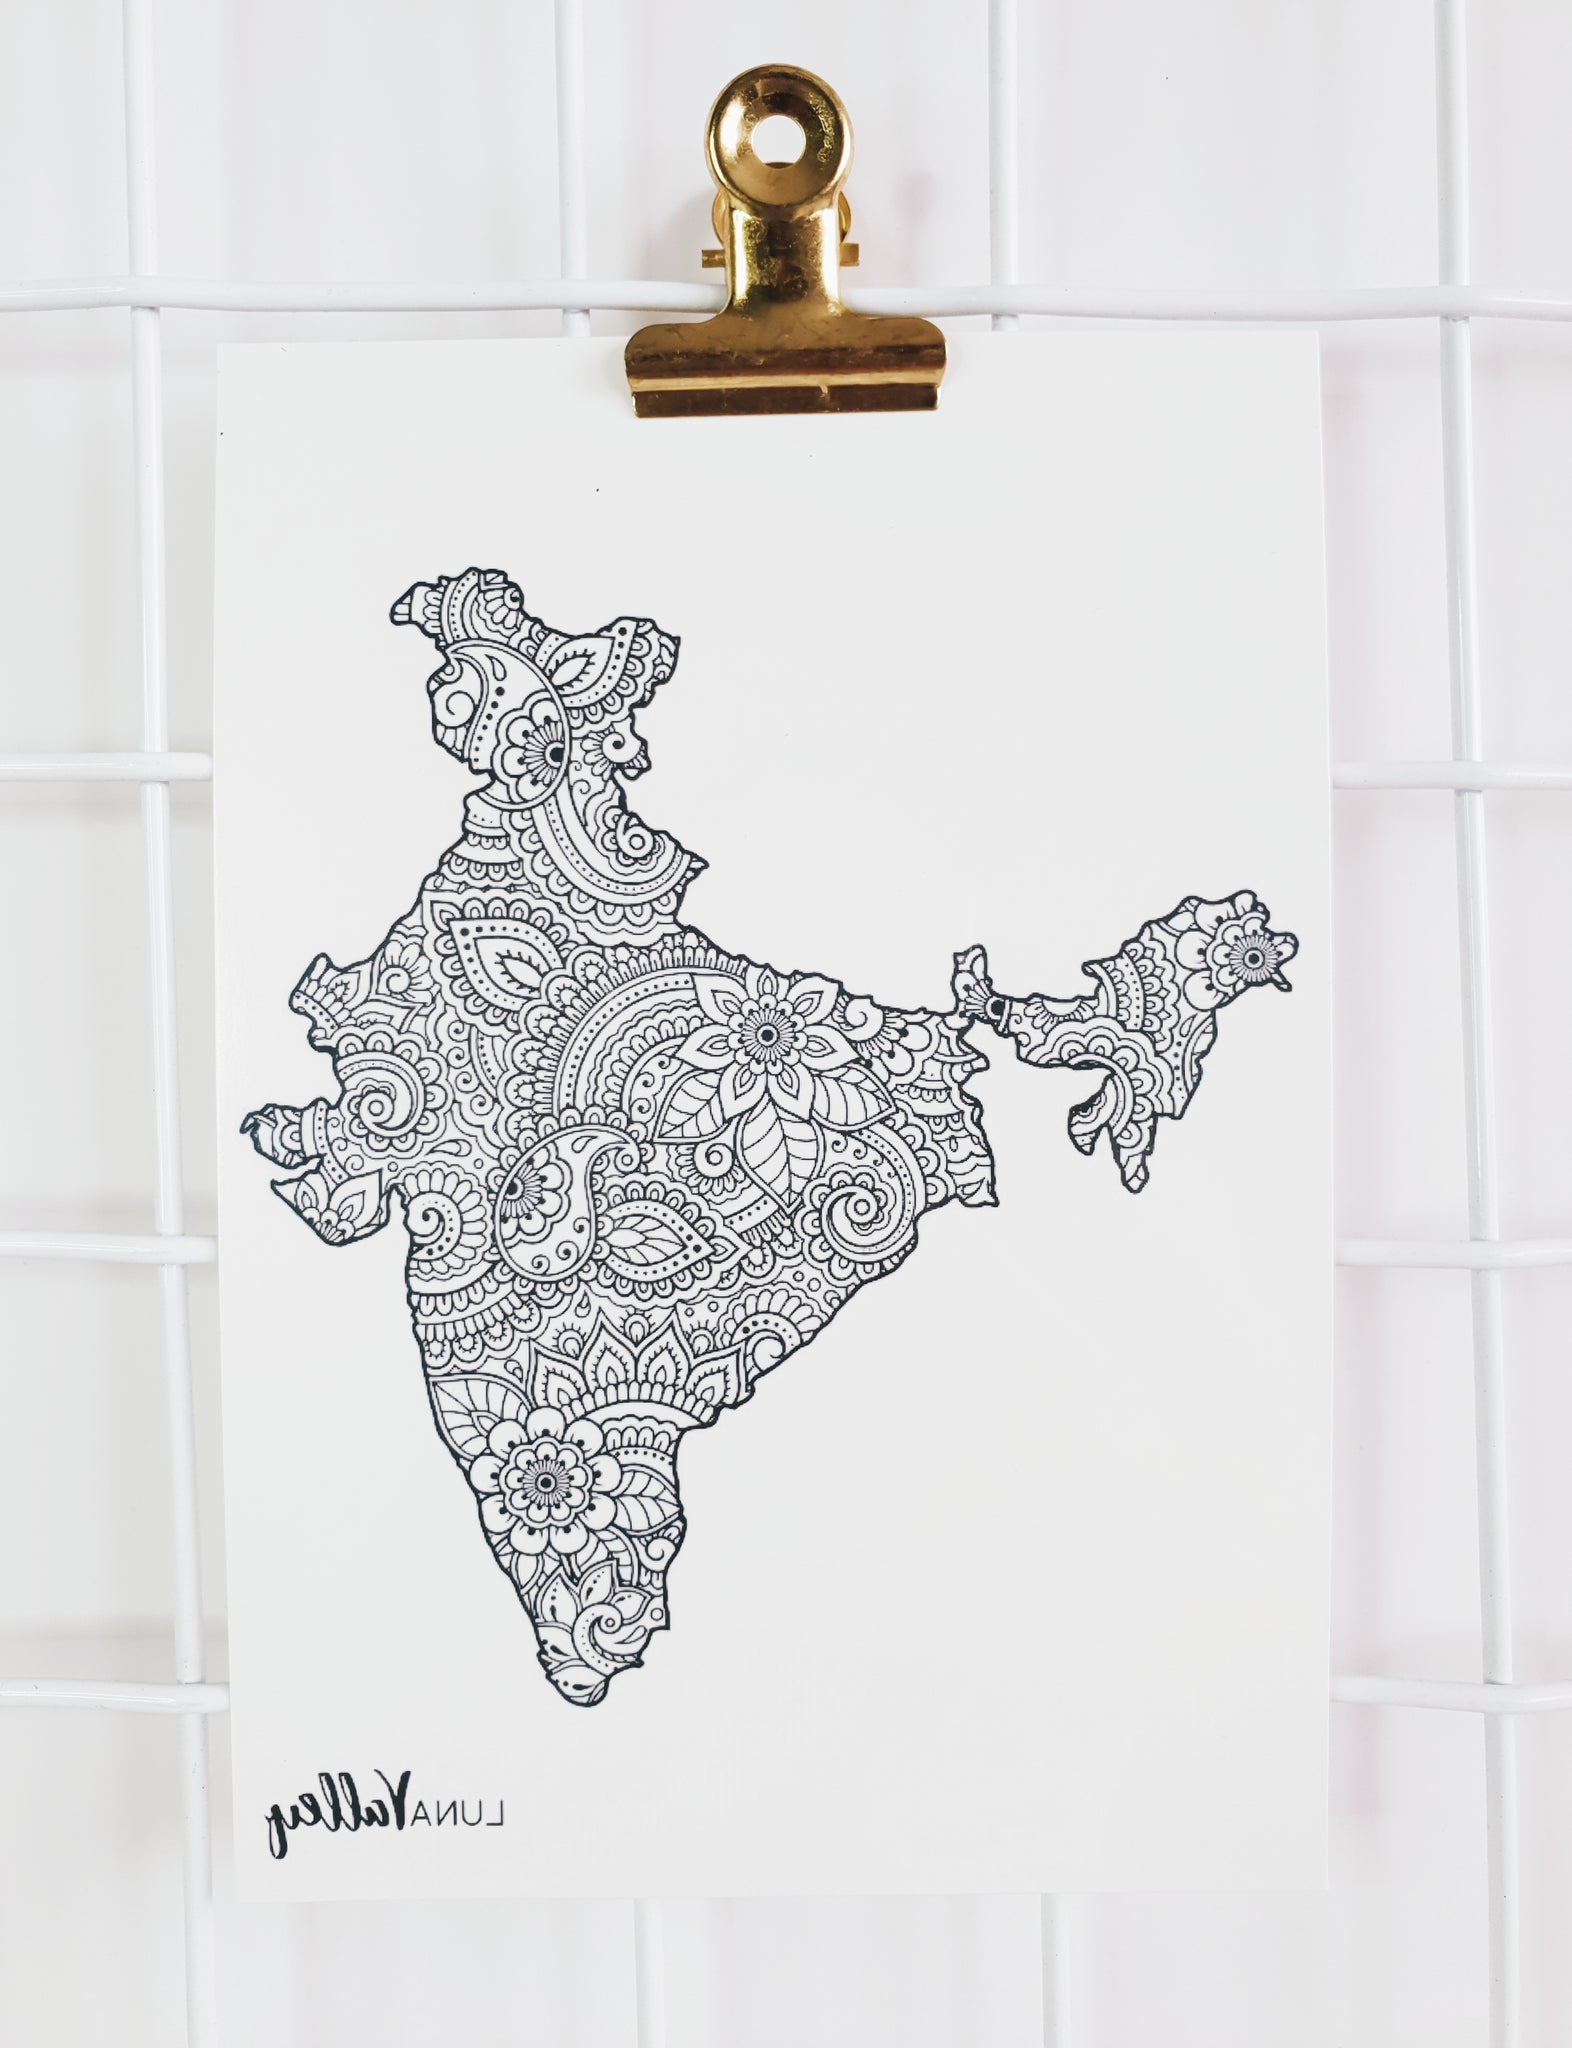 draw India map and write Mughal Empire send me fast​ - Brainly.in